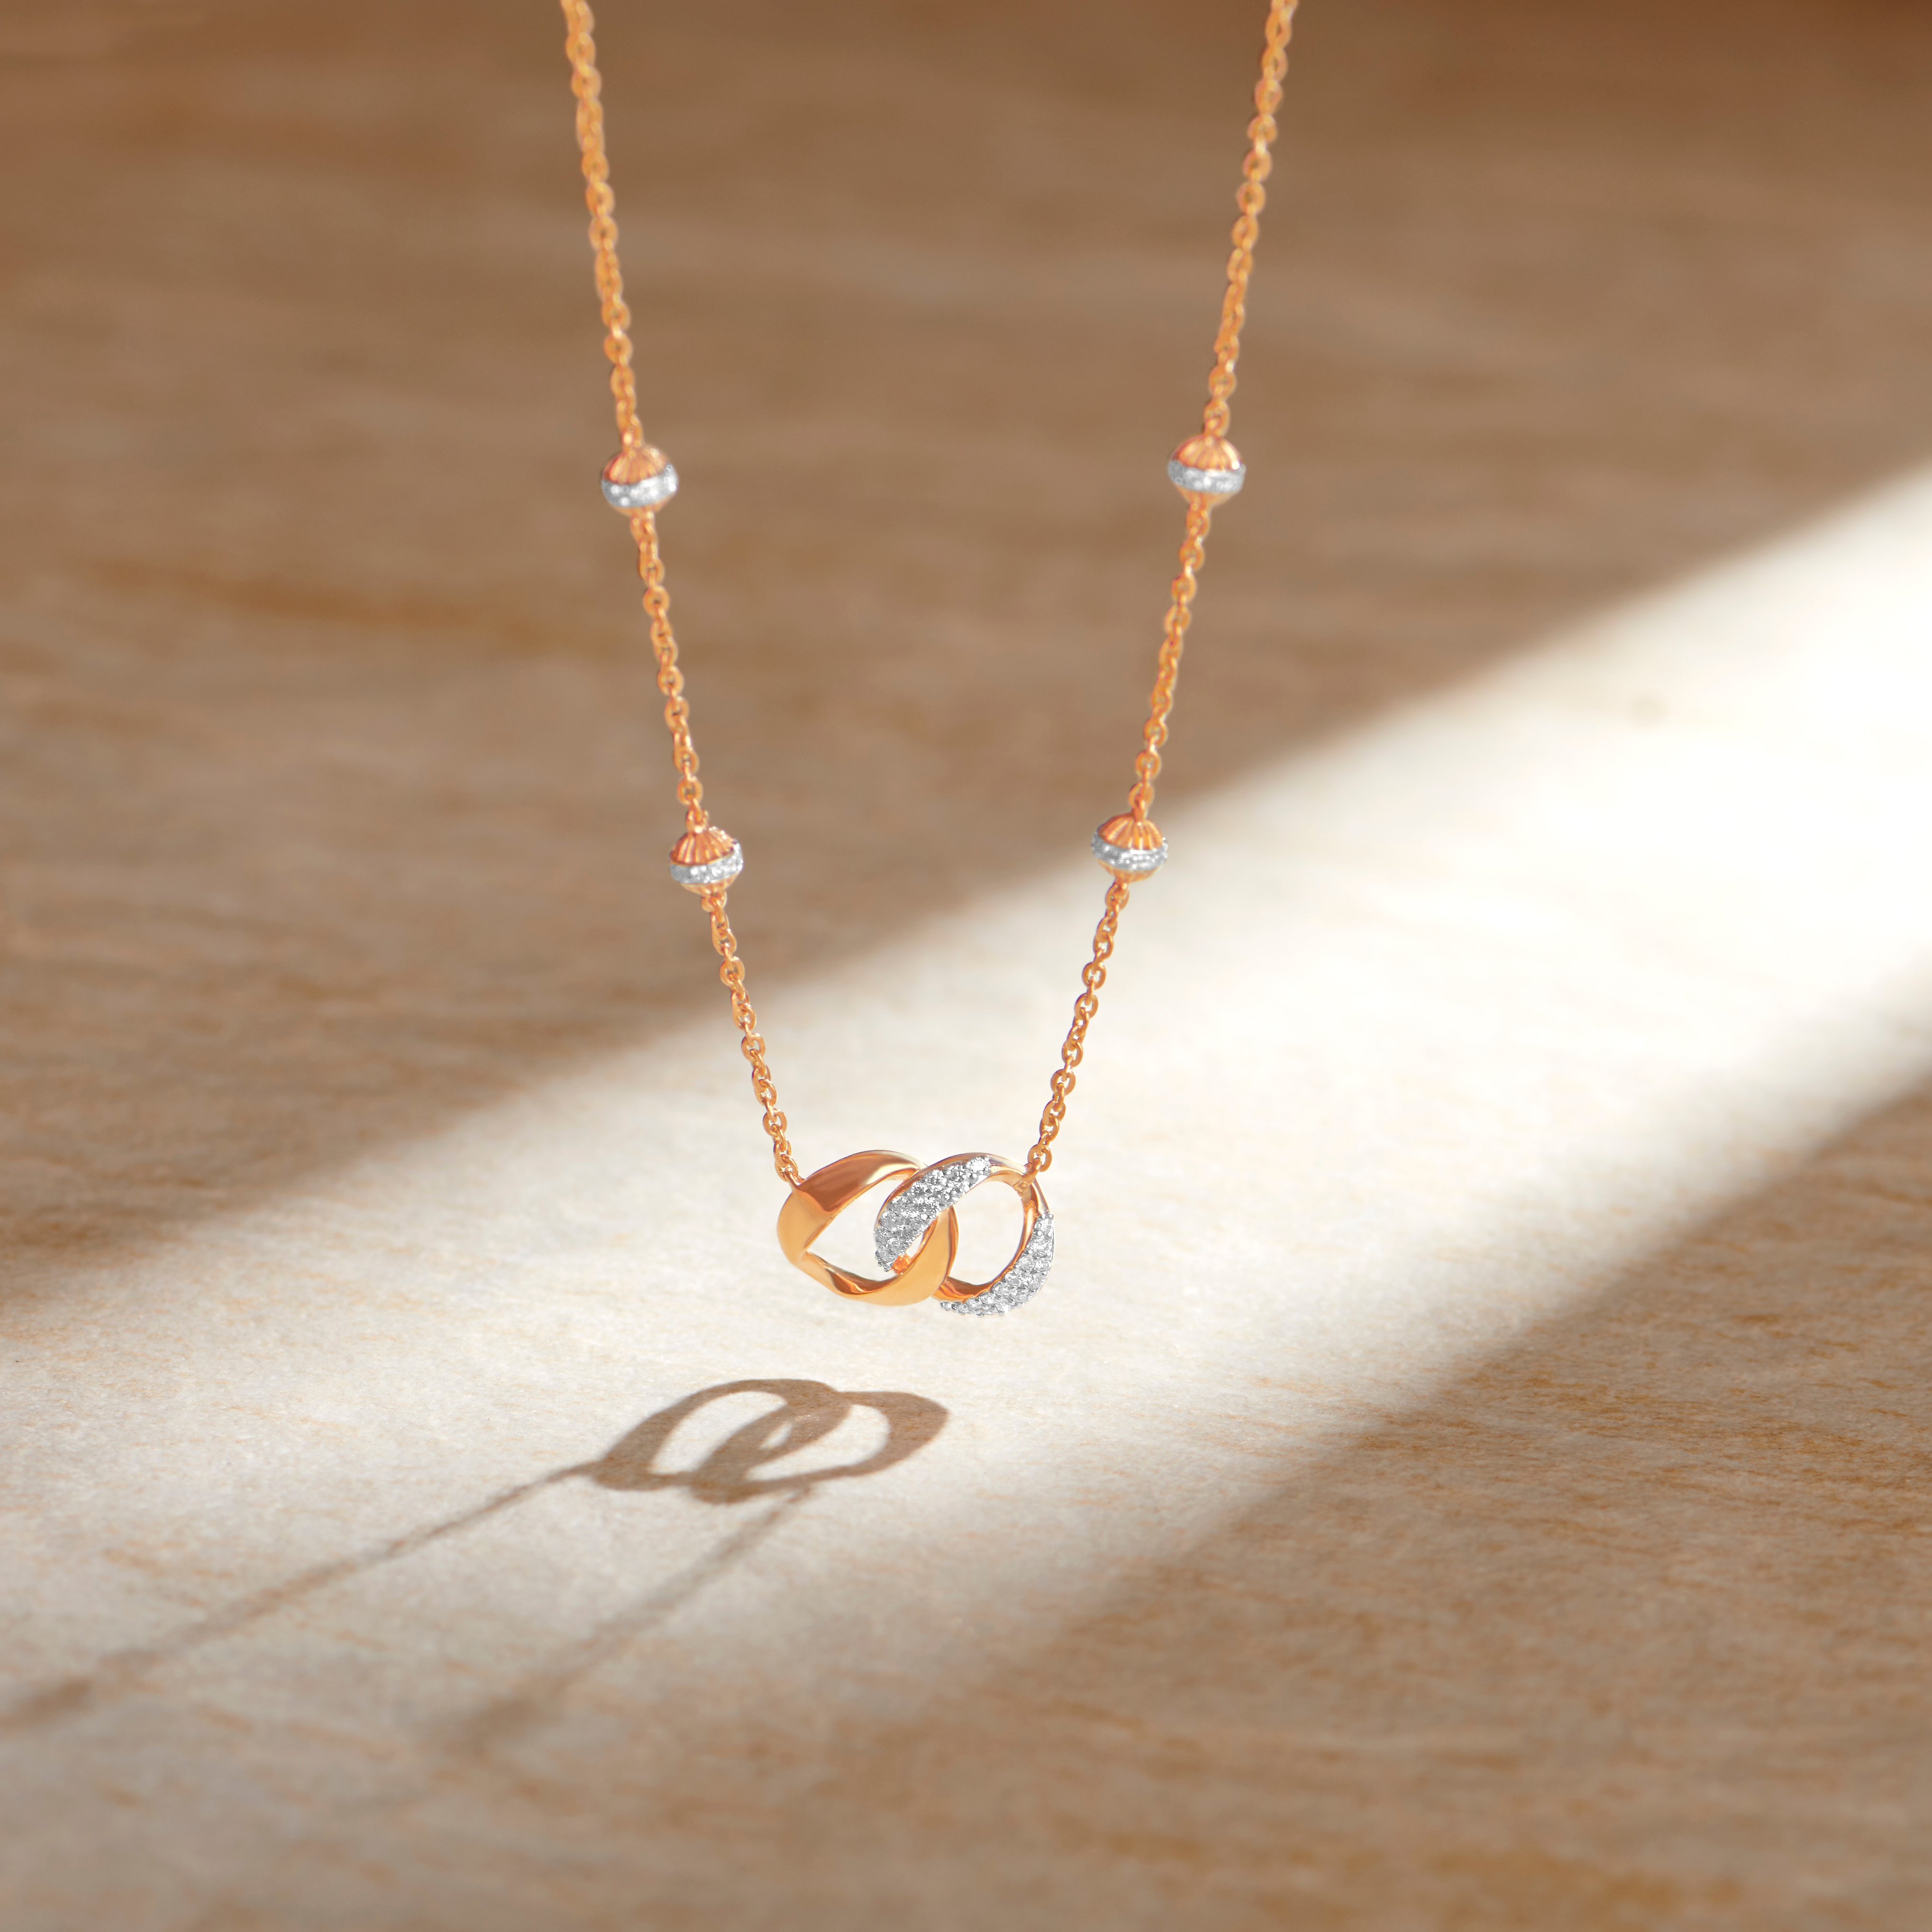 Entwined Diamond Necklace